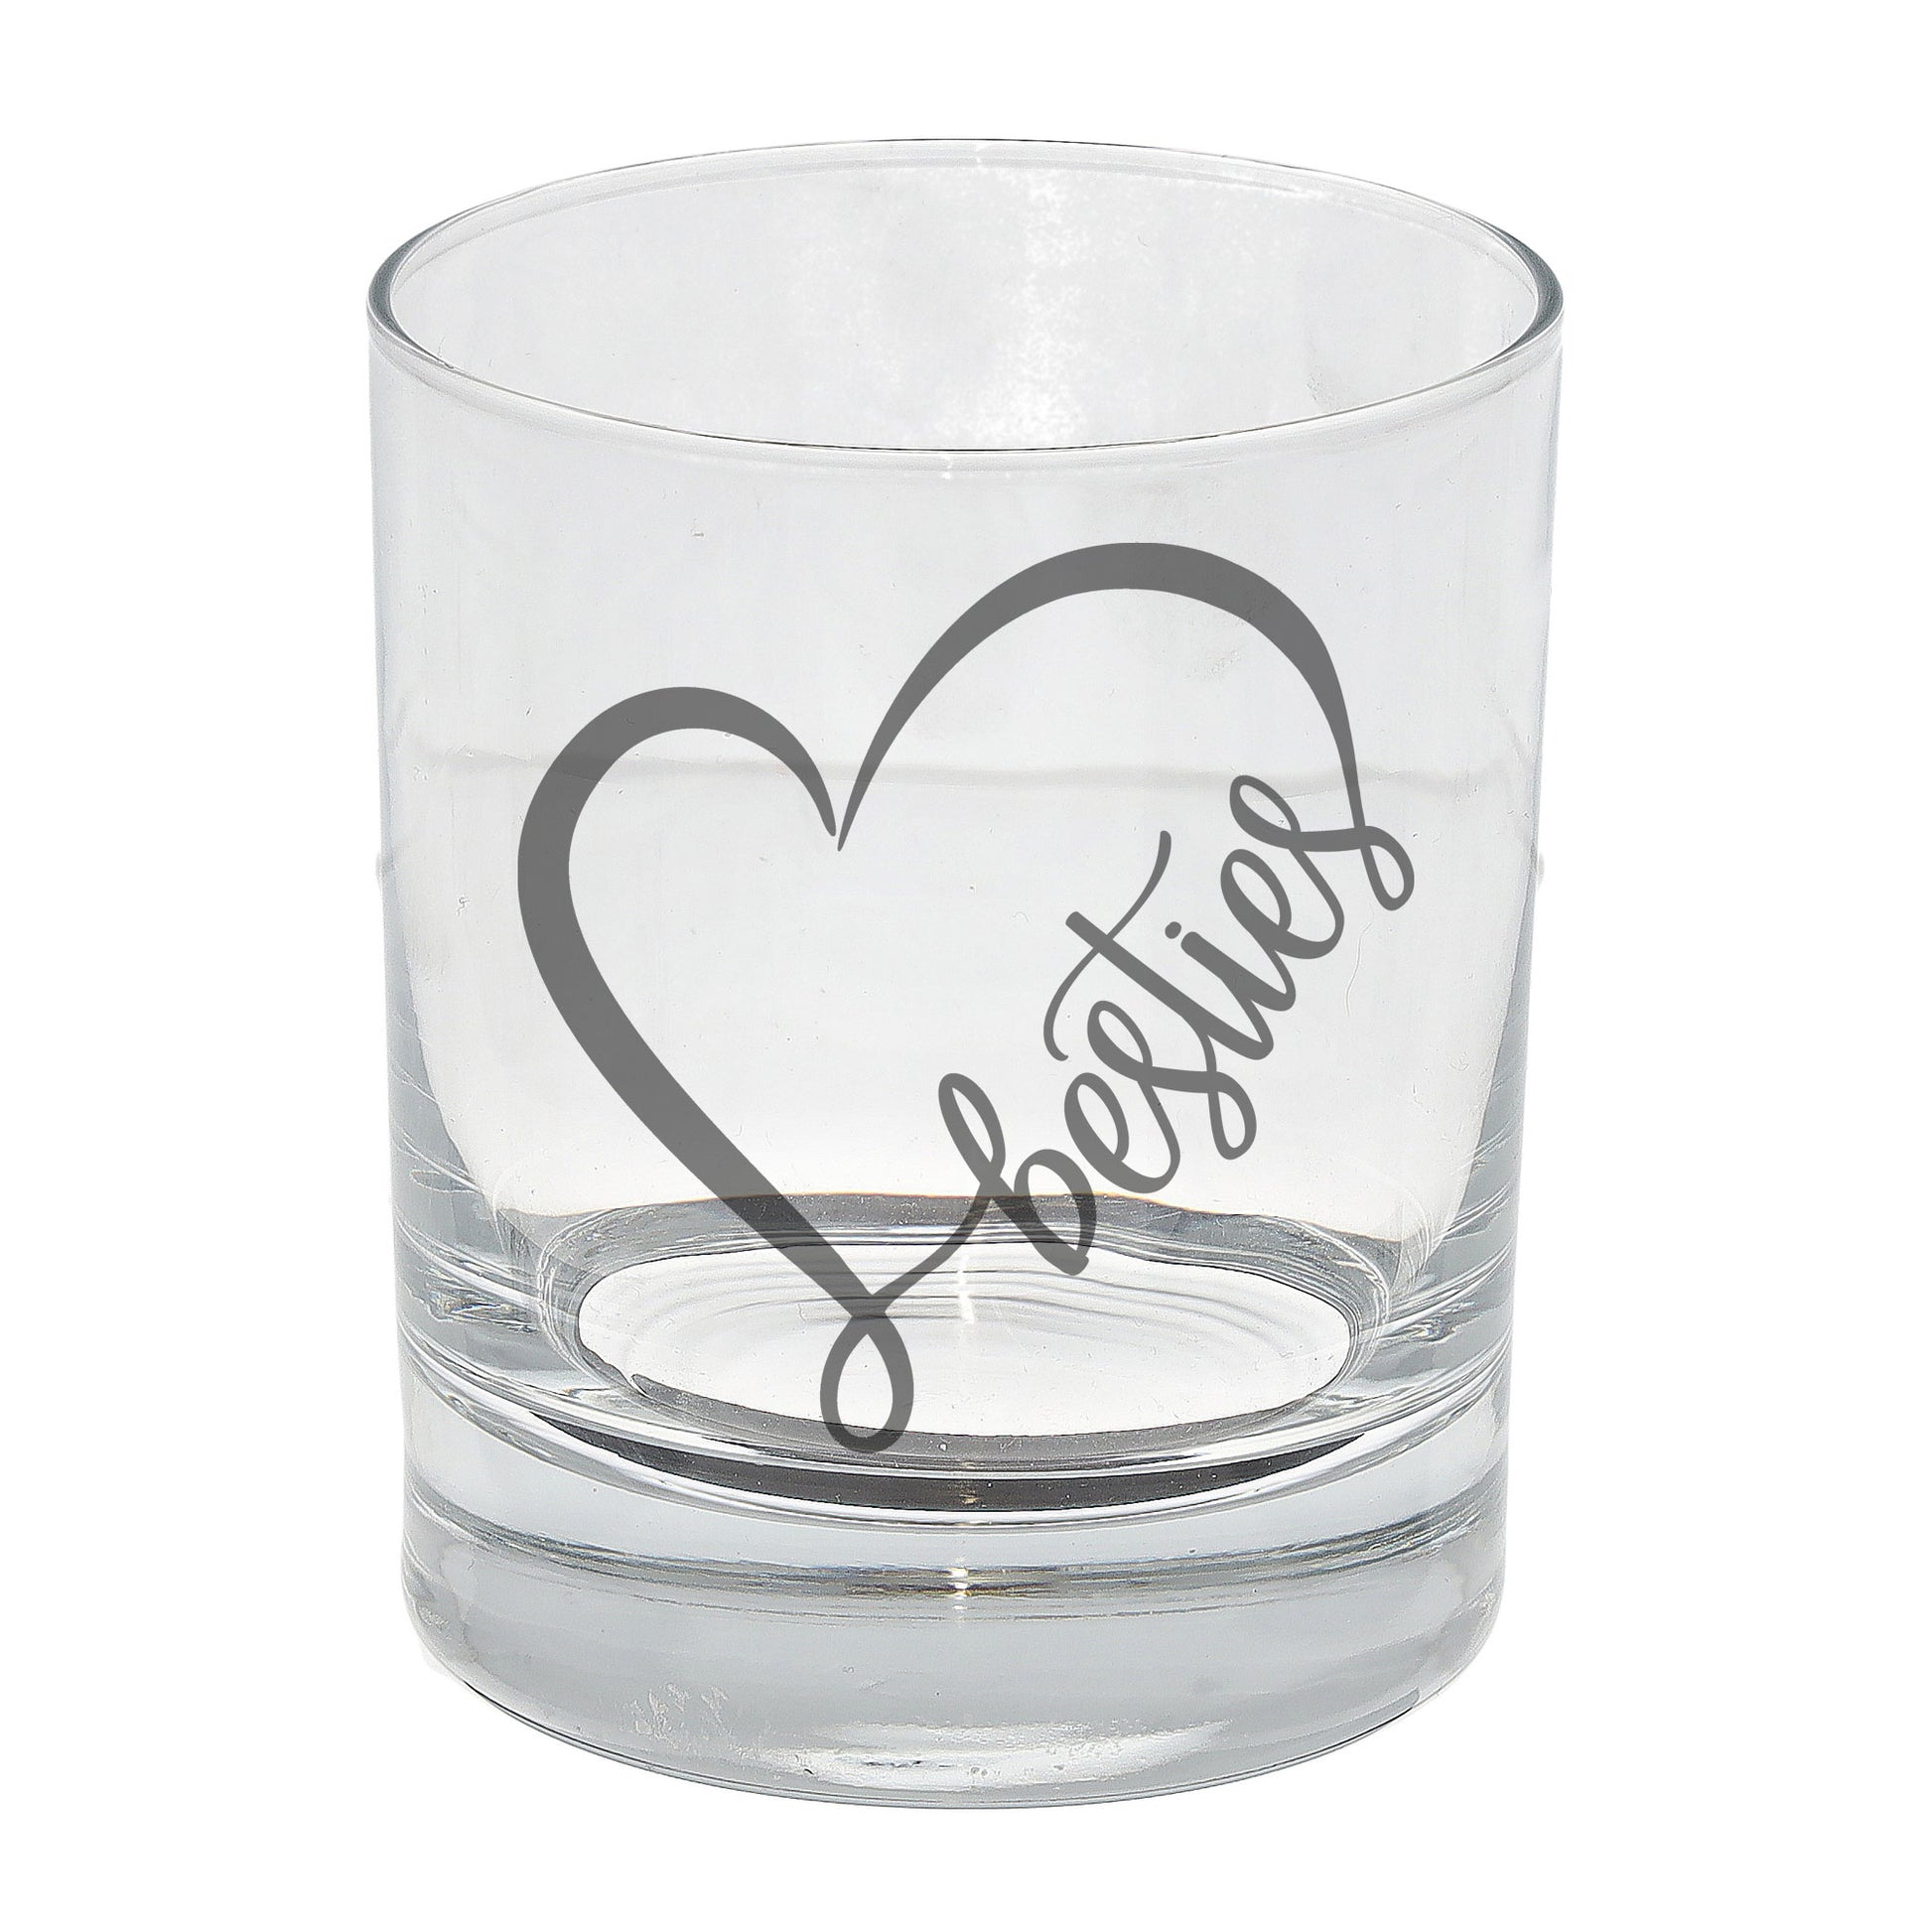 Besties Engraved Whisky Glass and/or Coaster Set  - Always Looking Good - Whisky Glass Only  